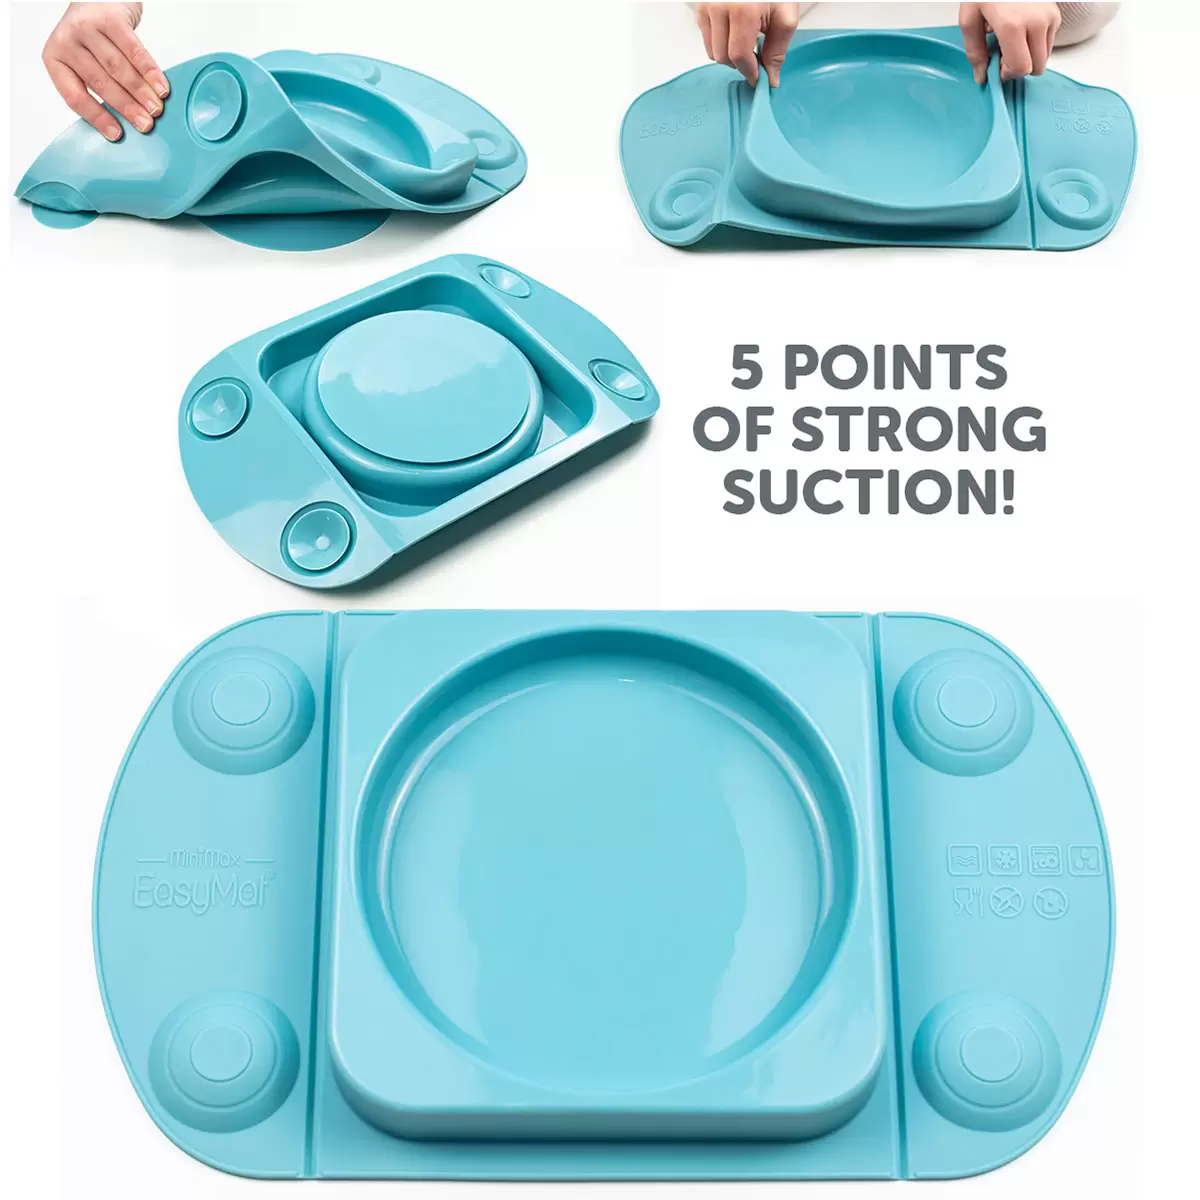 EasyMat Mini Max Open Suction Weaning Plate Assortment, Teal 